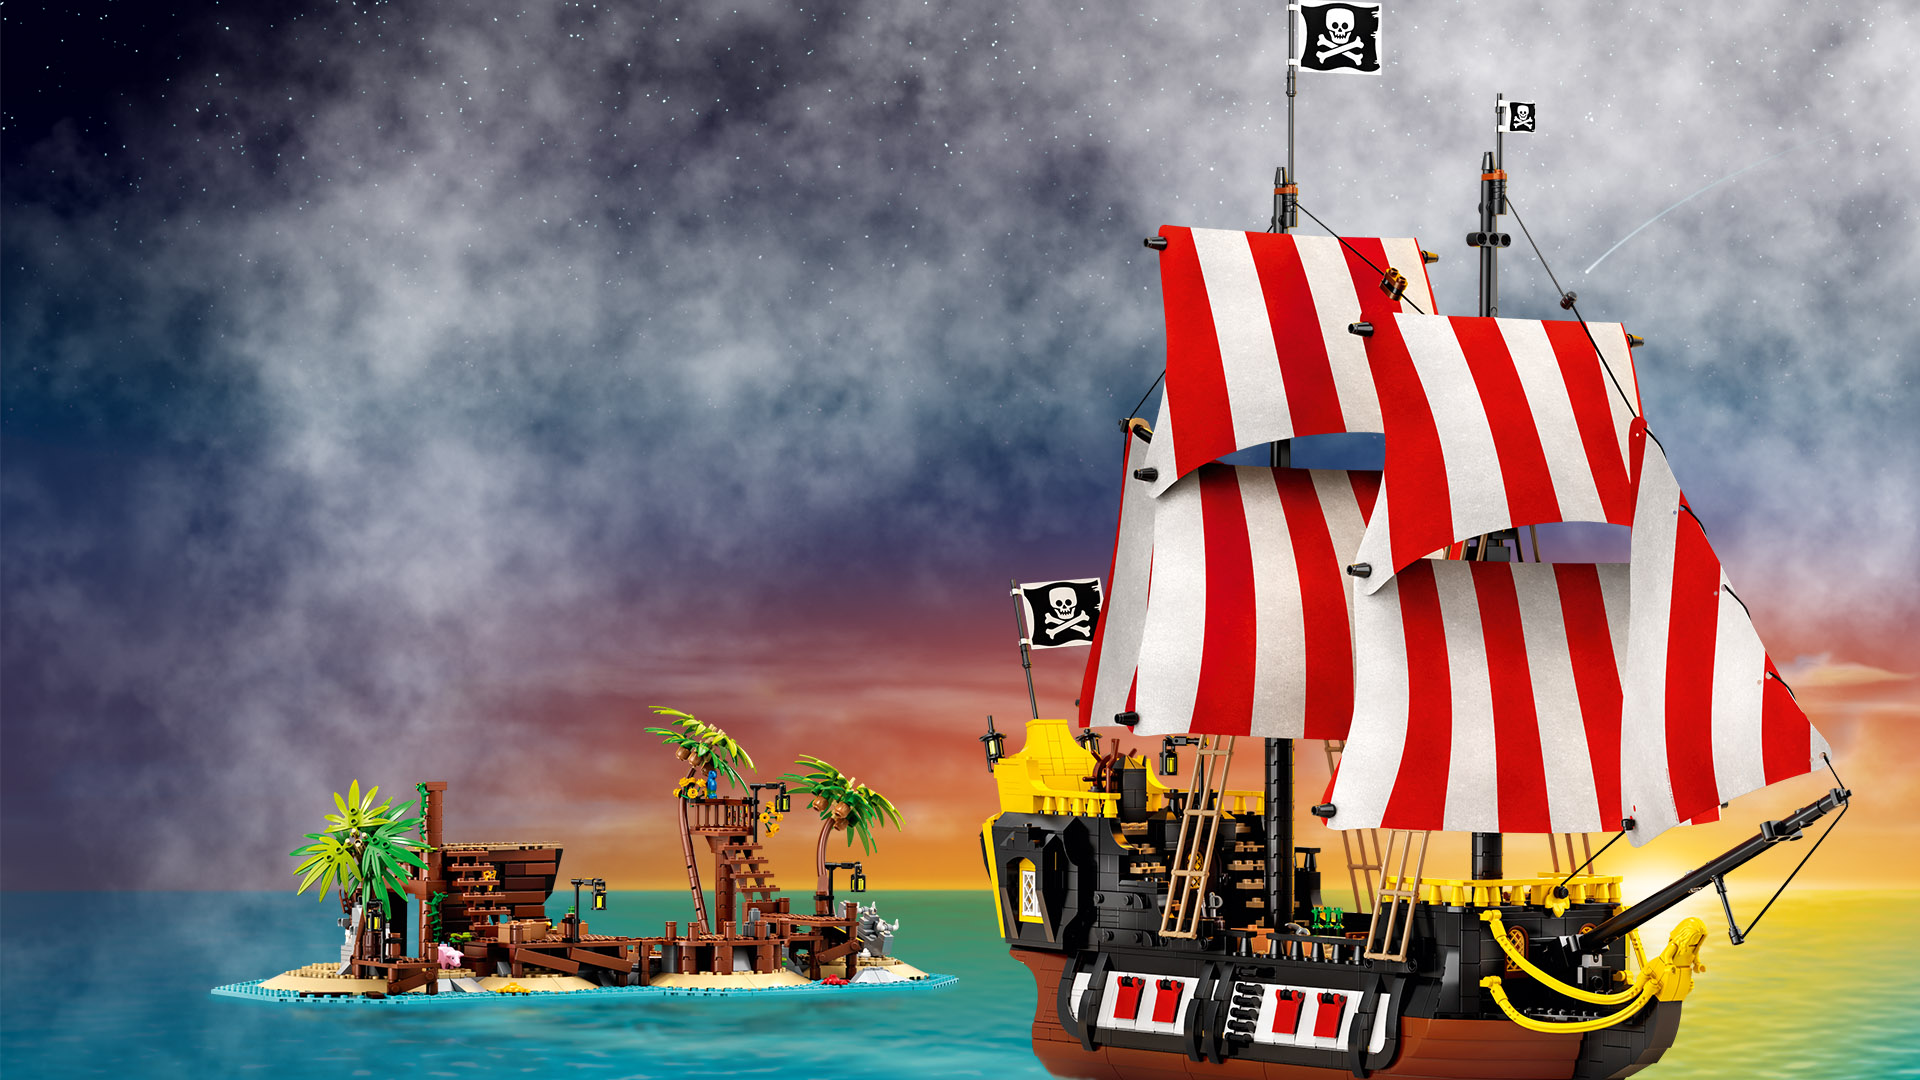 Lego Pirate - Pirate and deserted island